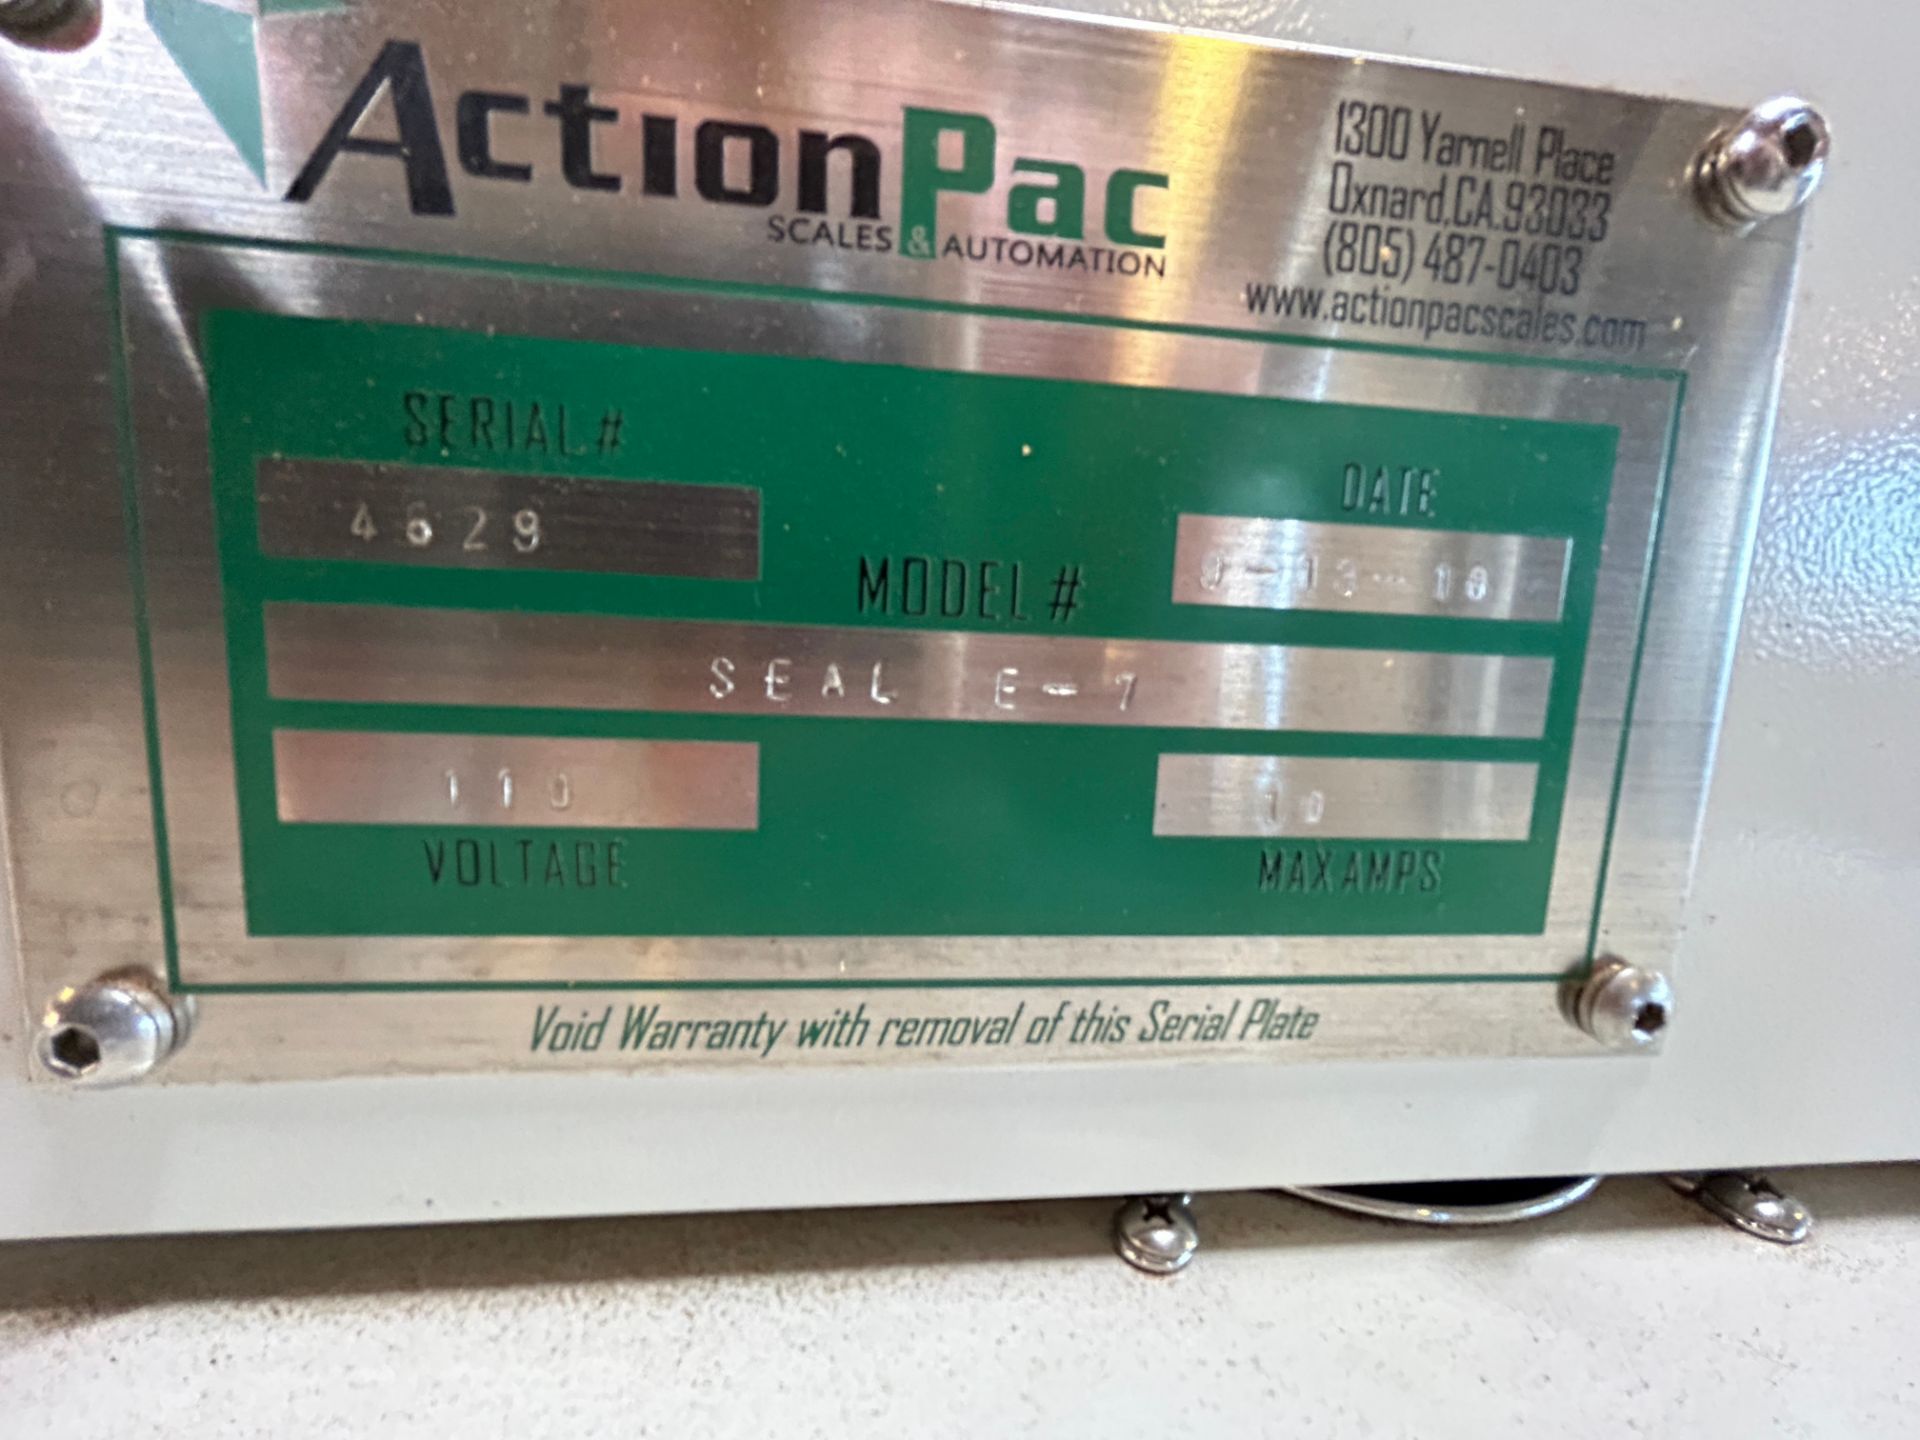 Action Pac Mdl SEAL-E-7, Continuous Inline Band Sealer, 16 Inch Long Seal Section, 9 Inch Wide x - Image 4 of 4